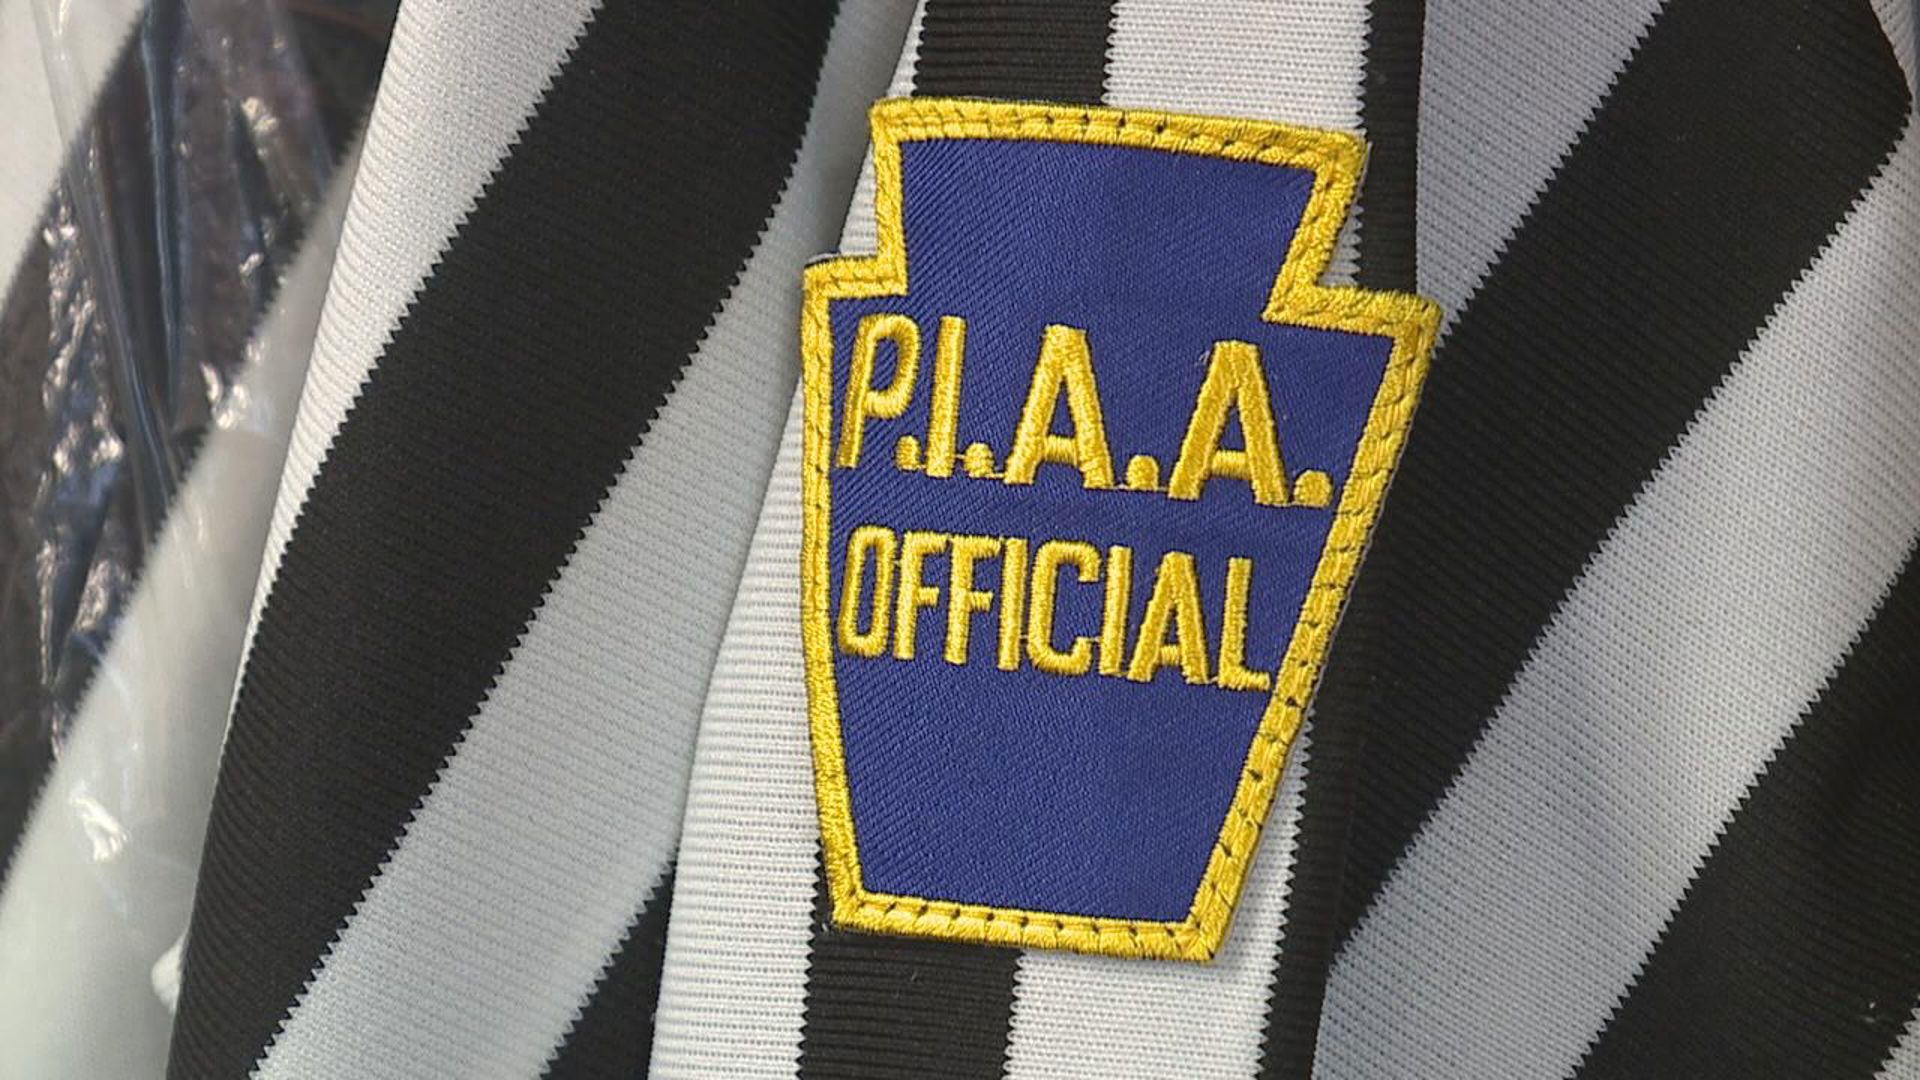 District III will host the first-ever referee symposium, which will include guest speakers and current PIAA refs, to help encourage sign-ups to combat the shortage.